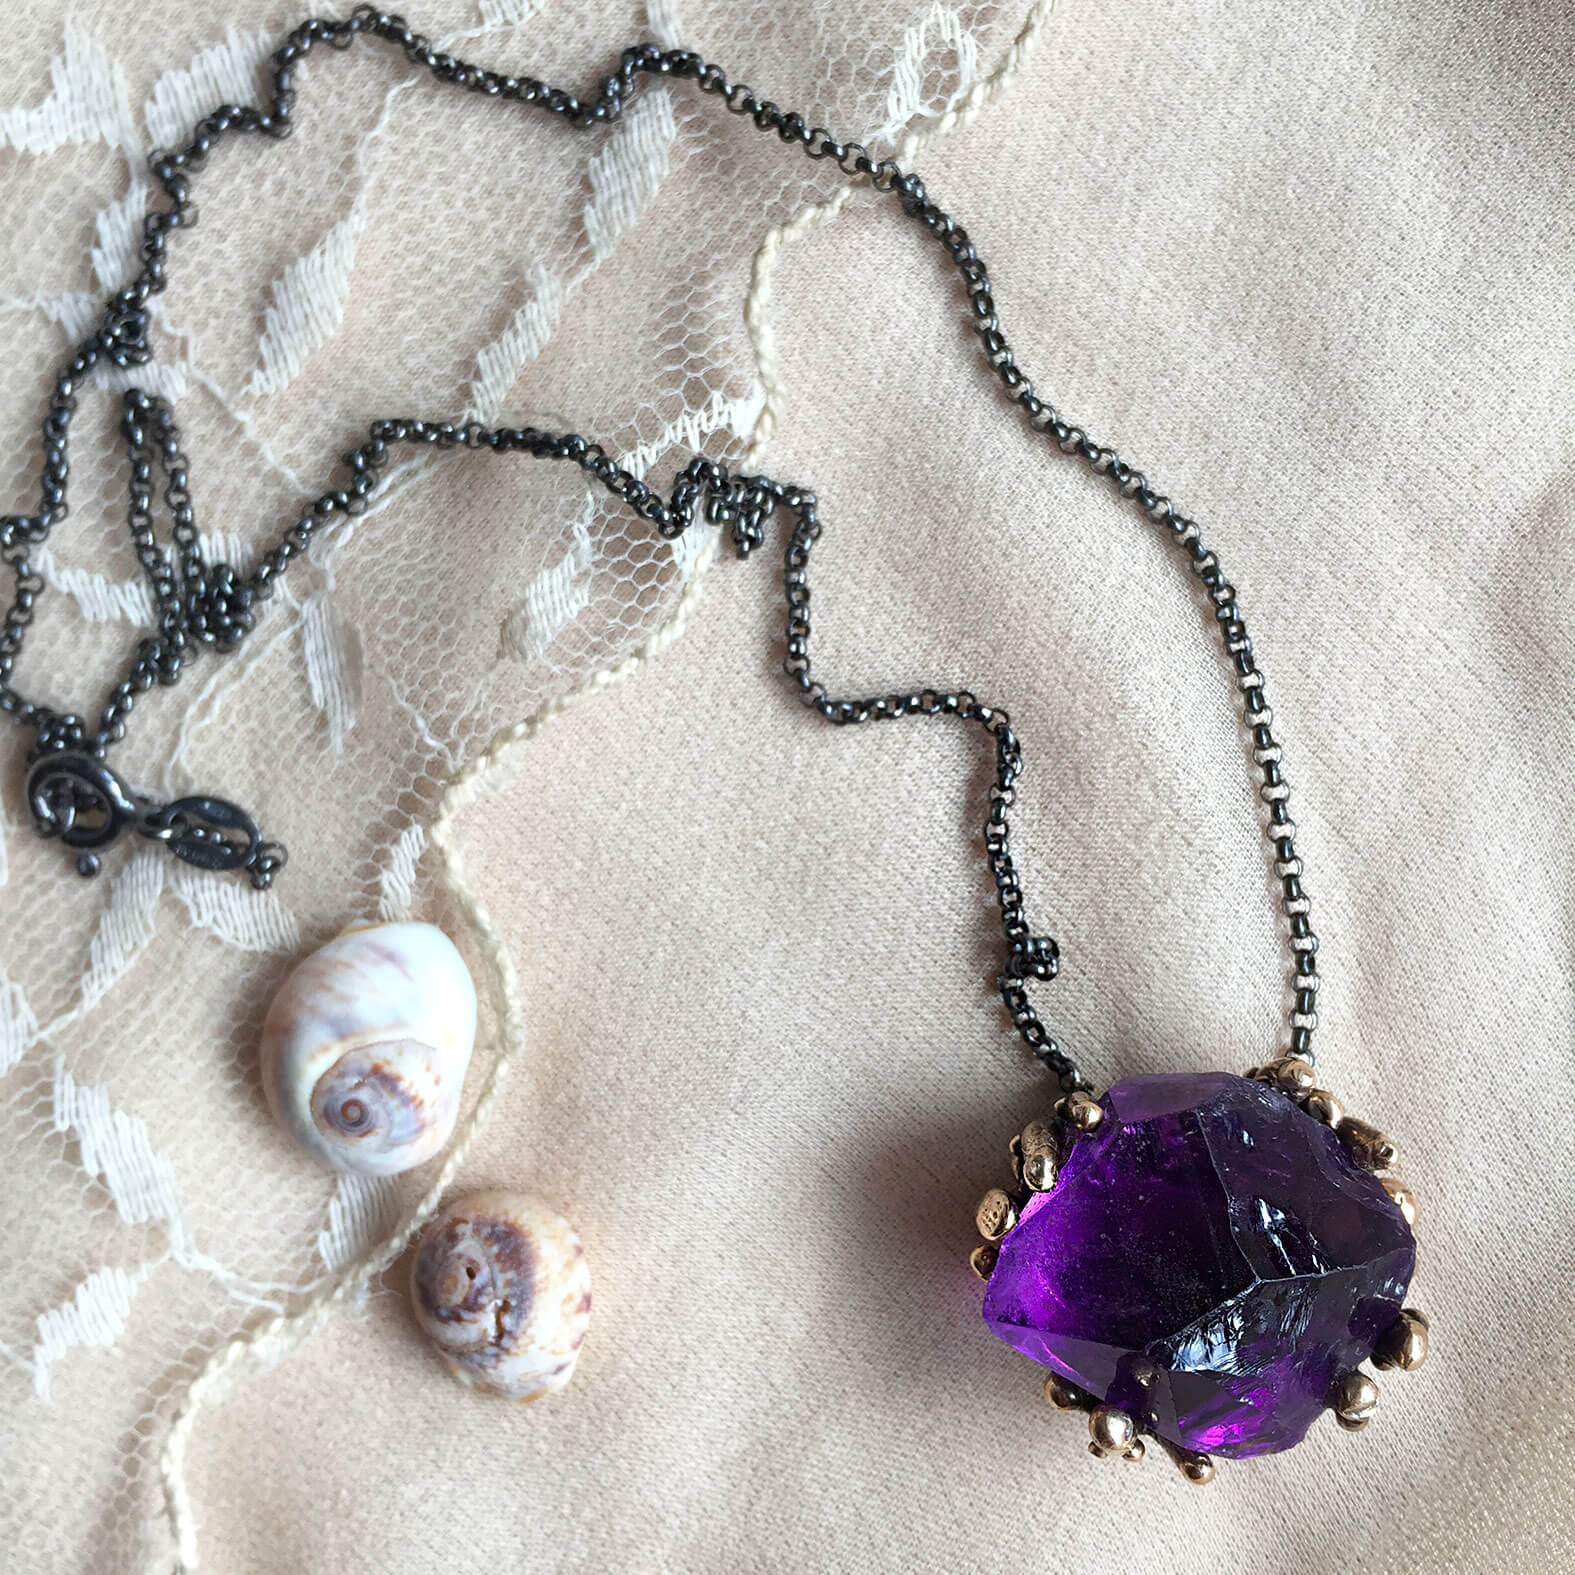 Healing Crystal necklace with top Quaity Amethyst to manifest intuition